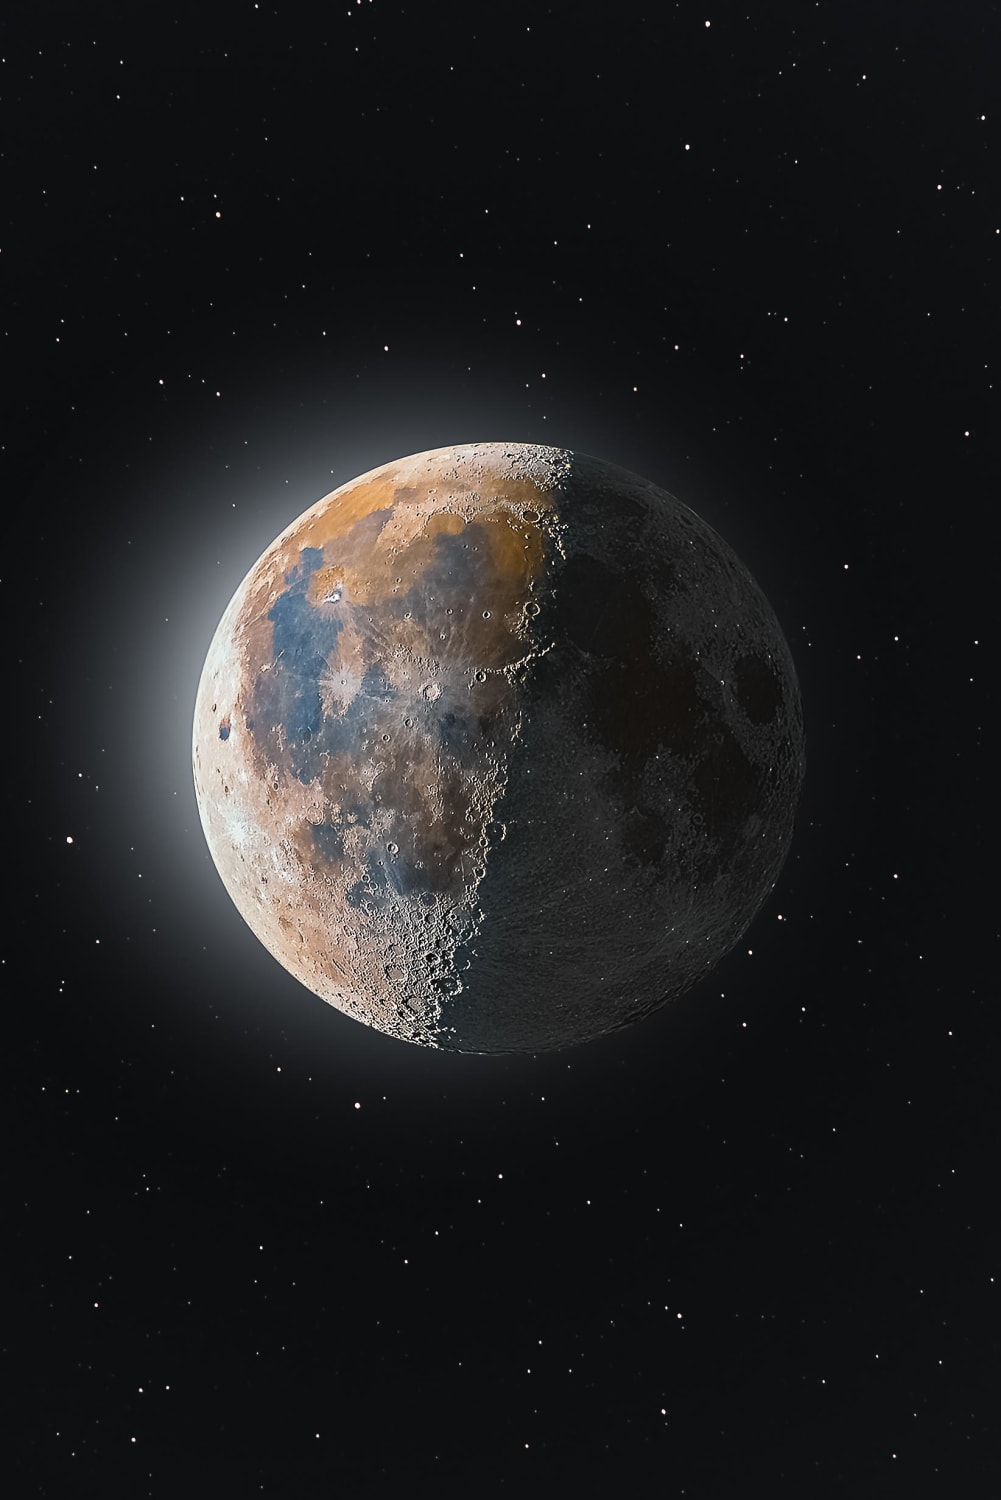 3D HDR Composite Moon image. I stayed up until 4am to shoot this!